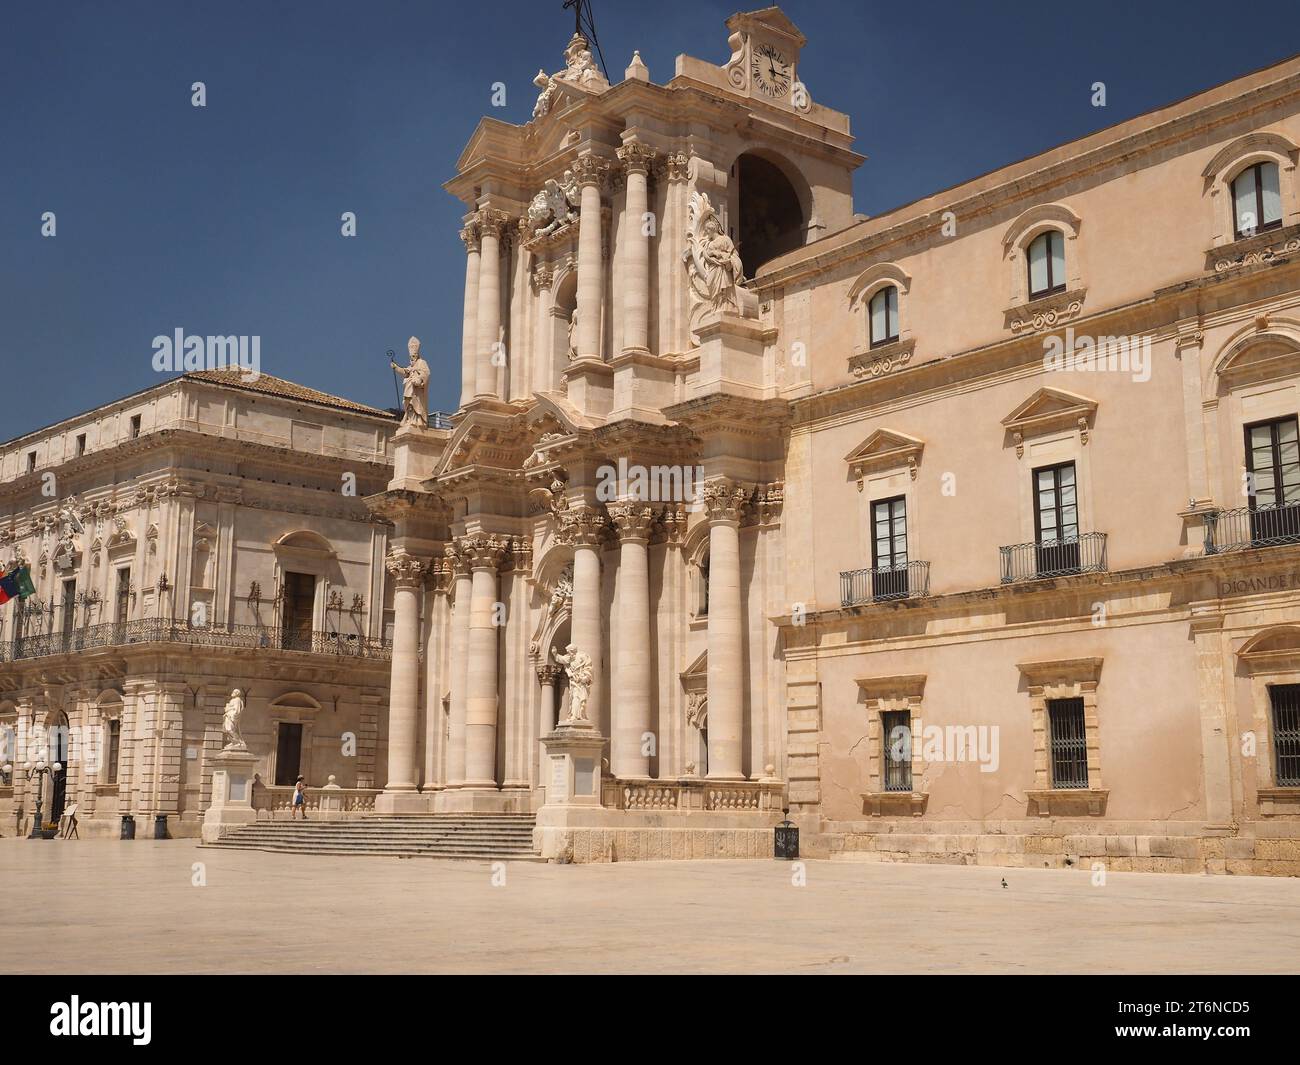 The facade of the Cathedral of Syracuse, Sicily Italy Stock Photo